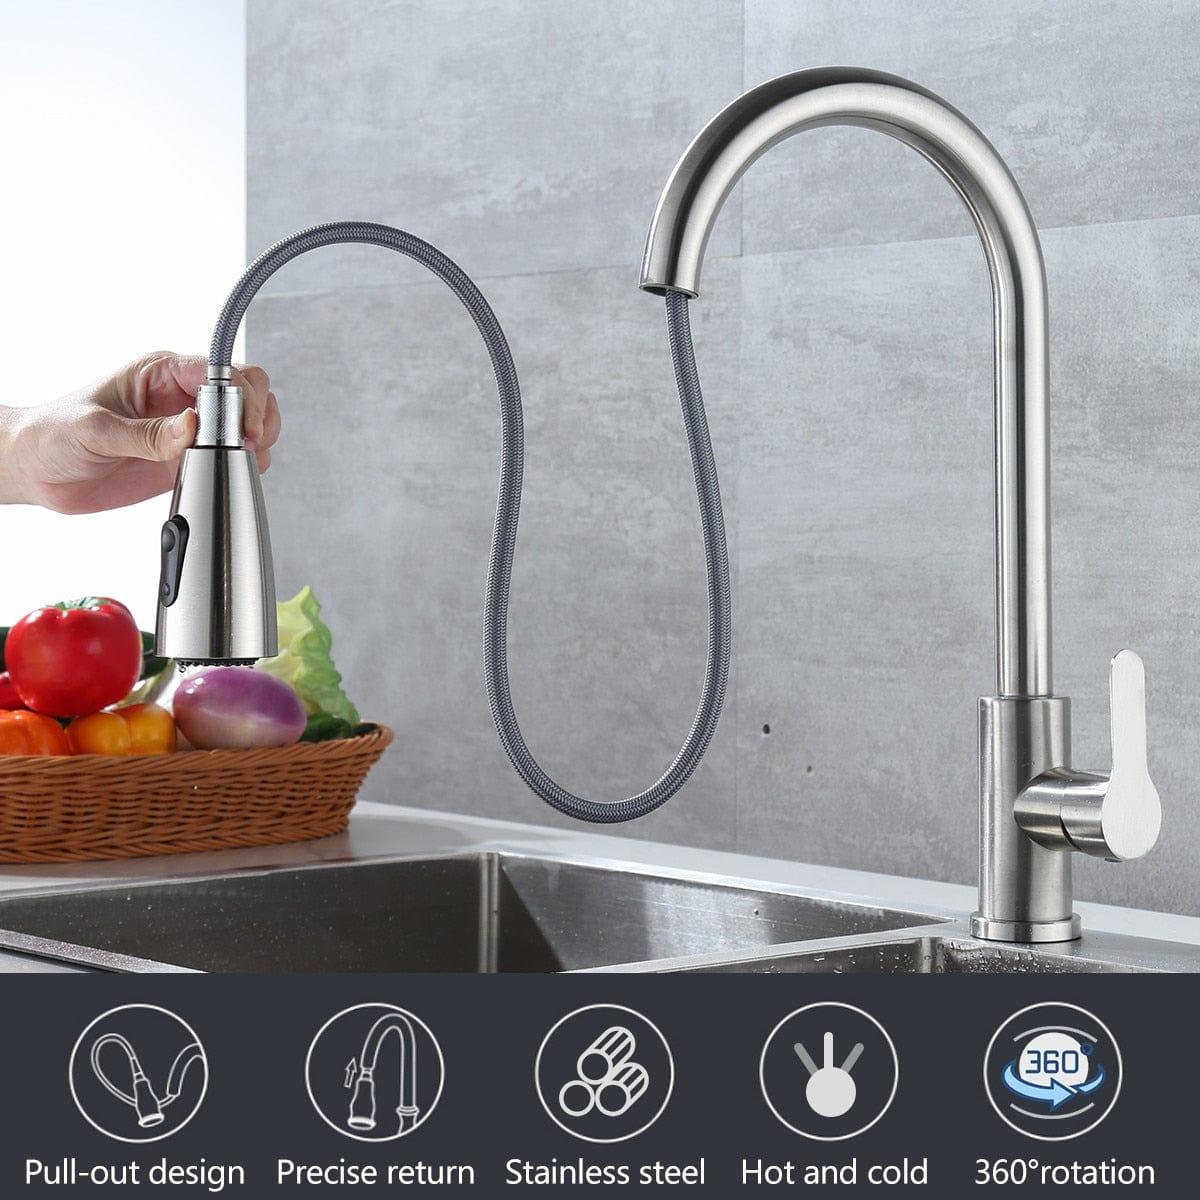 Shop 0 Kitchen Faucet Stainless Steel Faucets Hot Cold Water Mixer Tap 2 Function Stream Sprayer Single Handle Pull Out Kitchen Taps Mademoiselle Home Decor